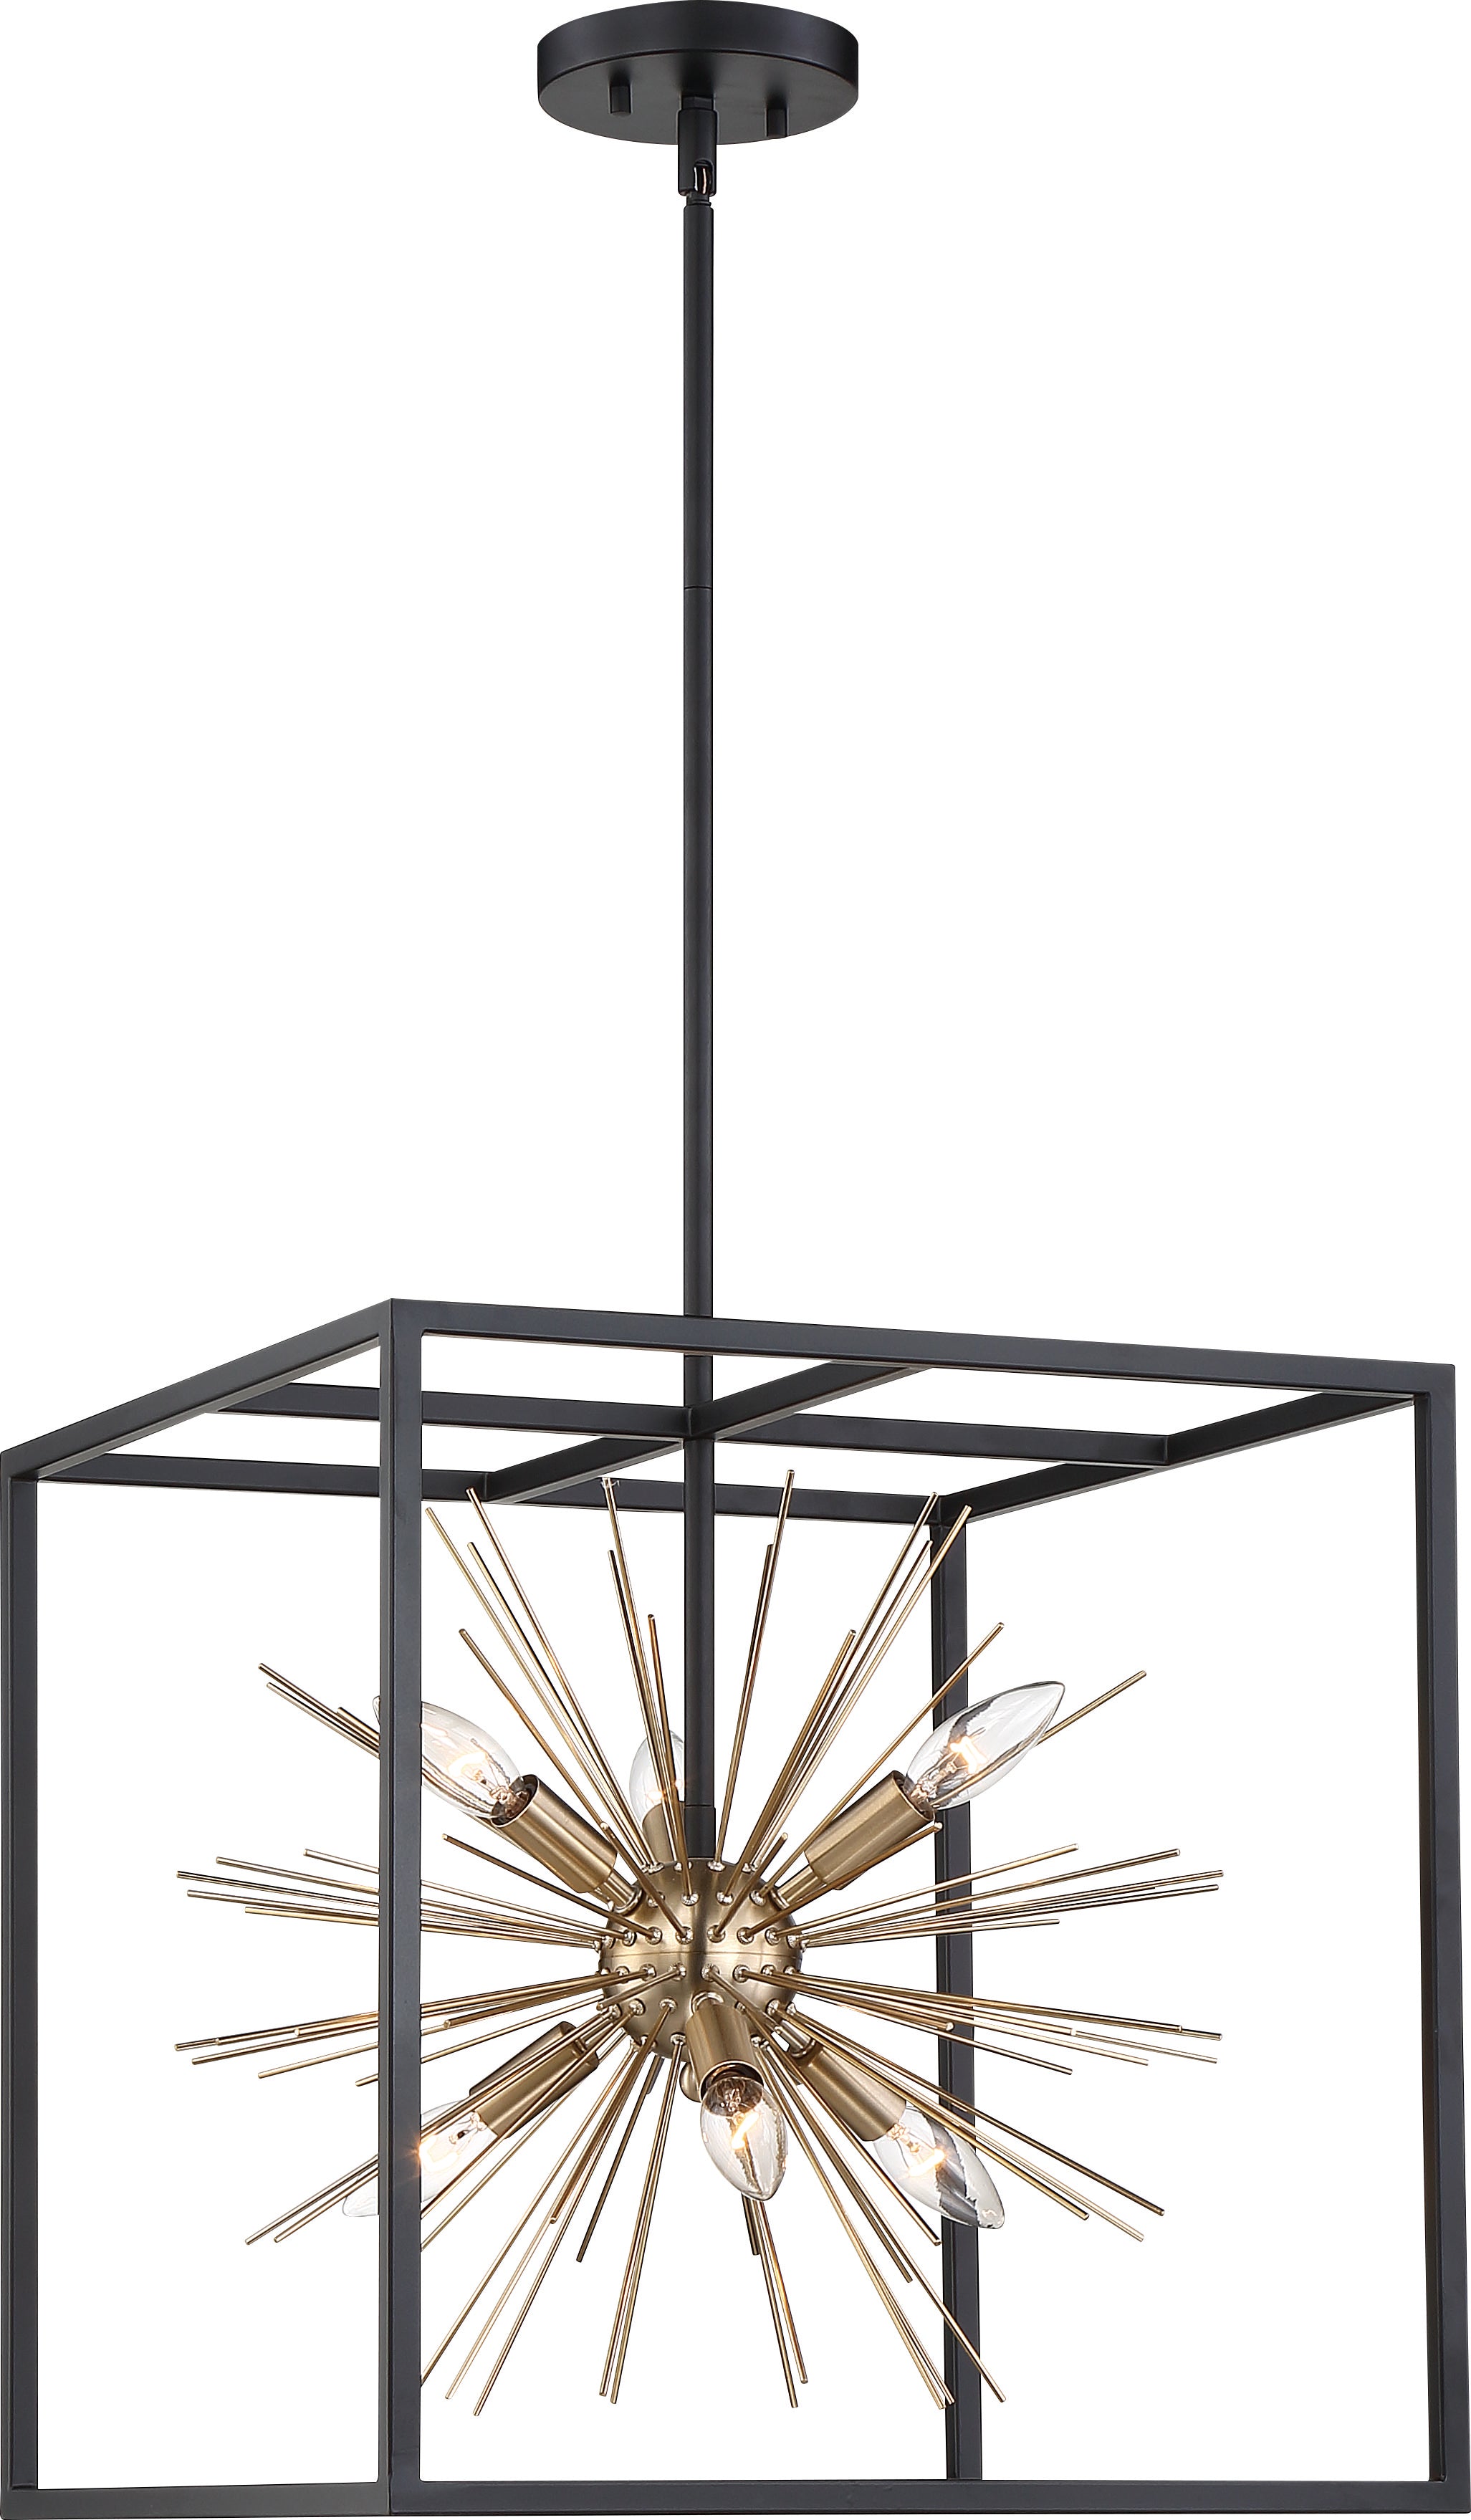 Spirefly 6 Light Pendant Fixture - Matte Black and Burnished Brass